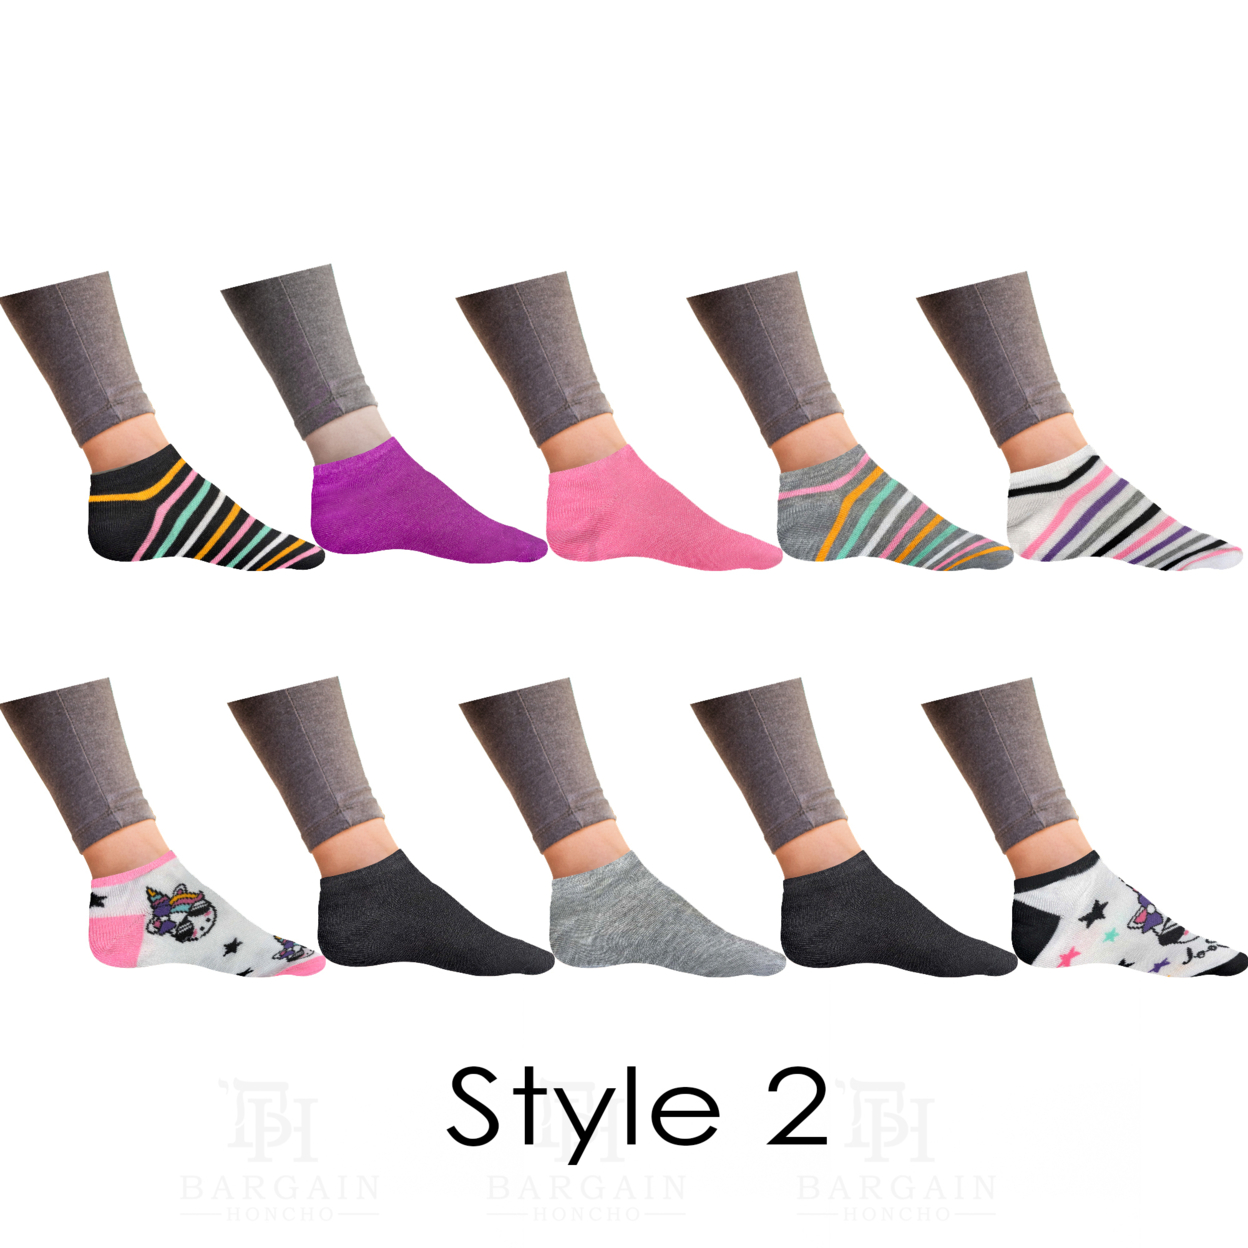 20-Pairs: Women’s Breathable Colorful Fun No Show Low Cut Ankle Socks - 1 & 3